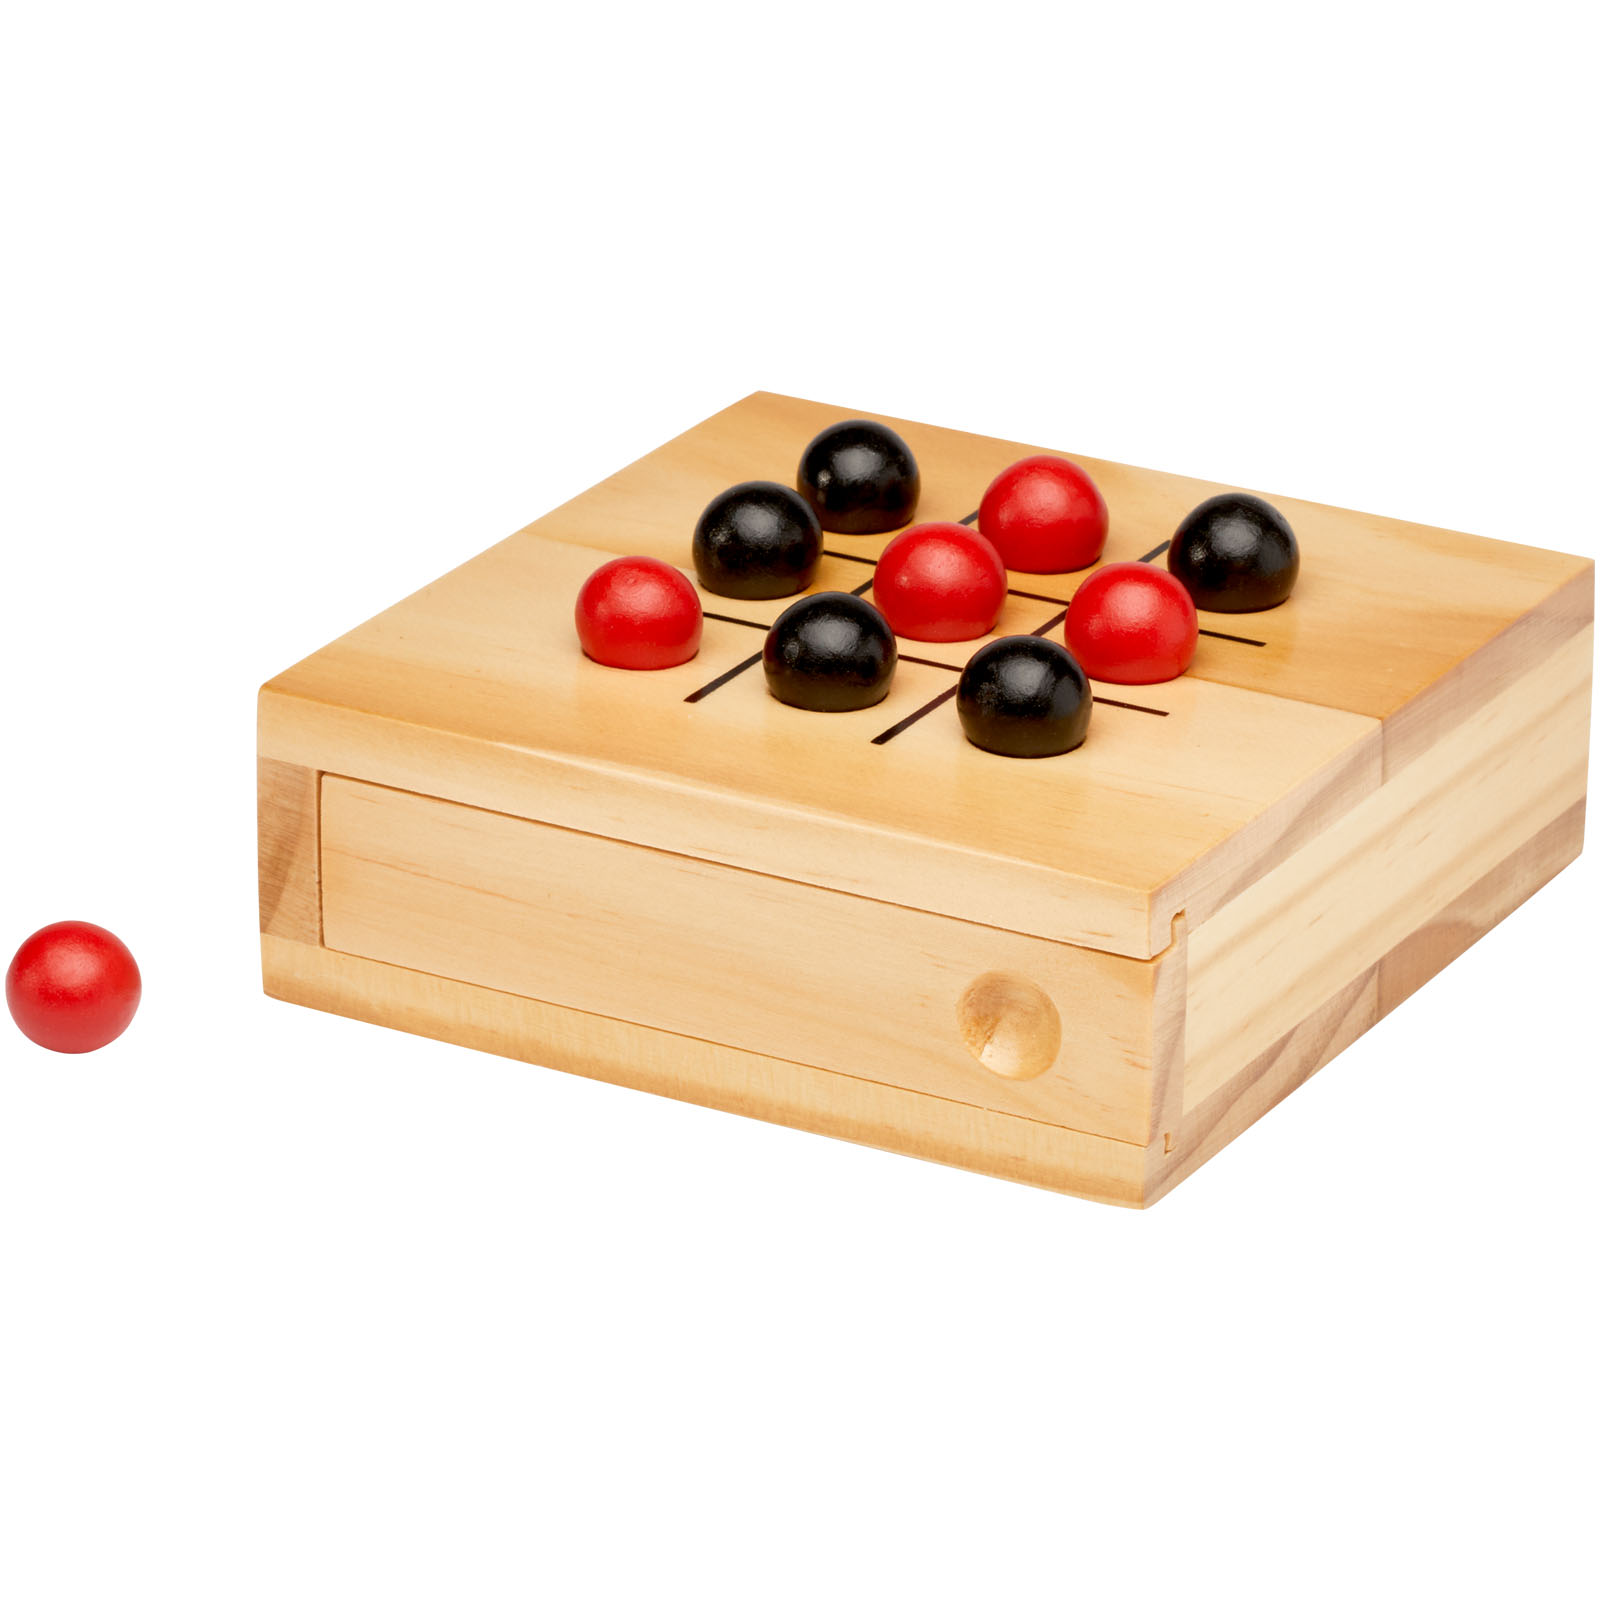 Toys & Games - Strobus wooden tic-tac-toe game